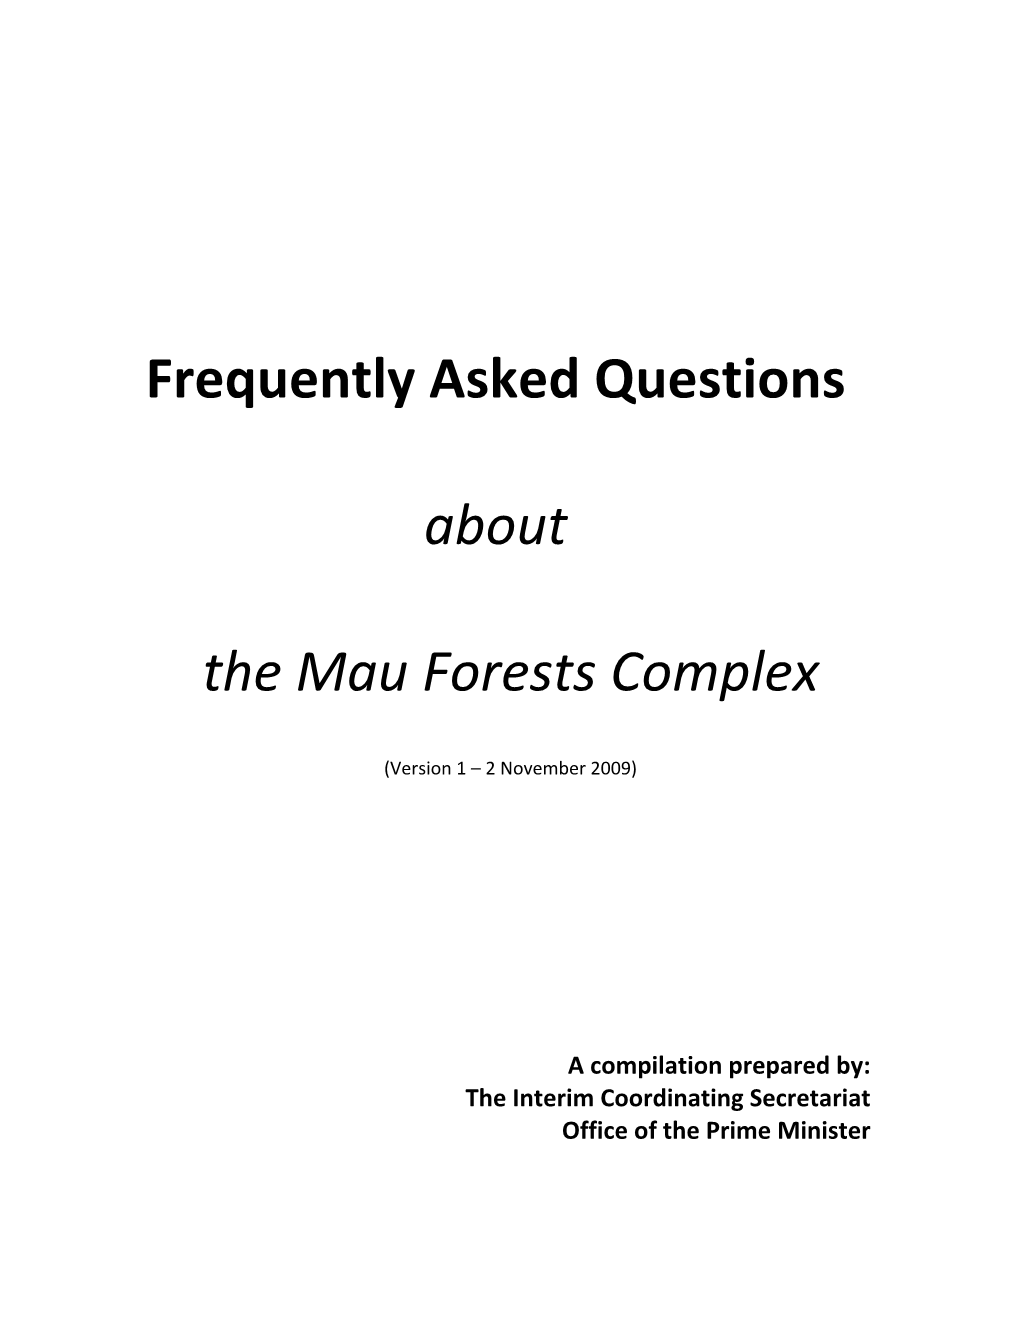 Frequently Asked Questions About the Mau Forests Complex